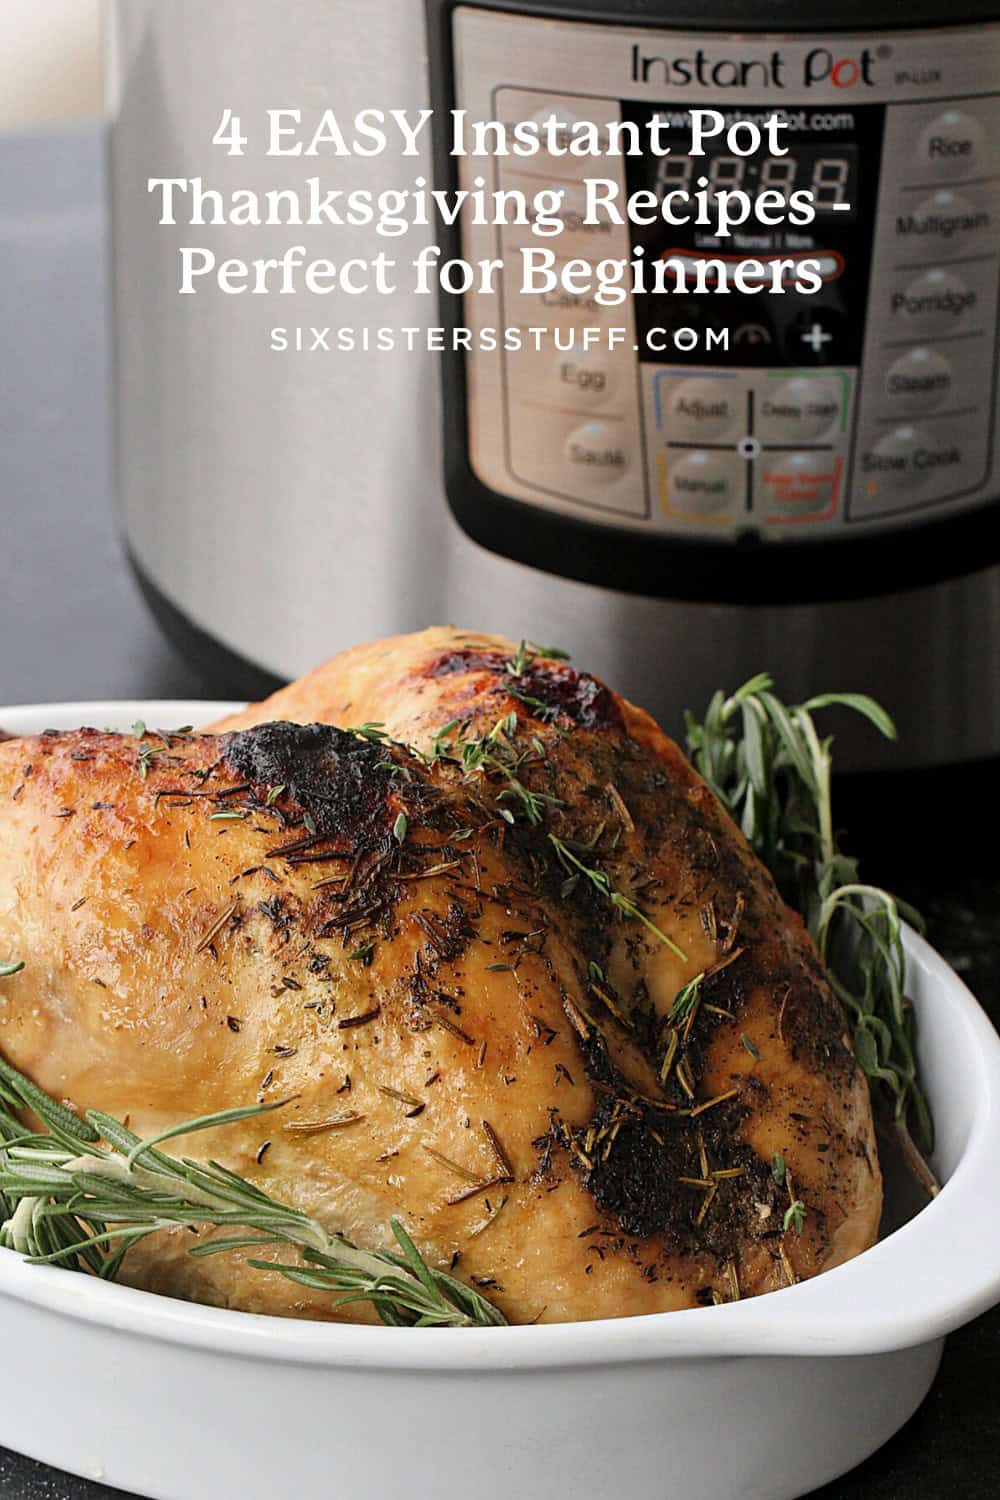 A roasted chicken garnished with herbs is placed in front of an Instant Pot. 